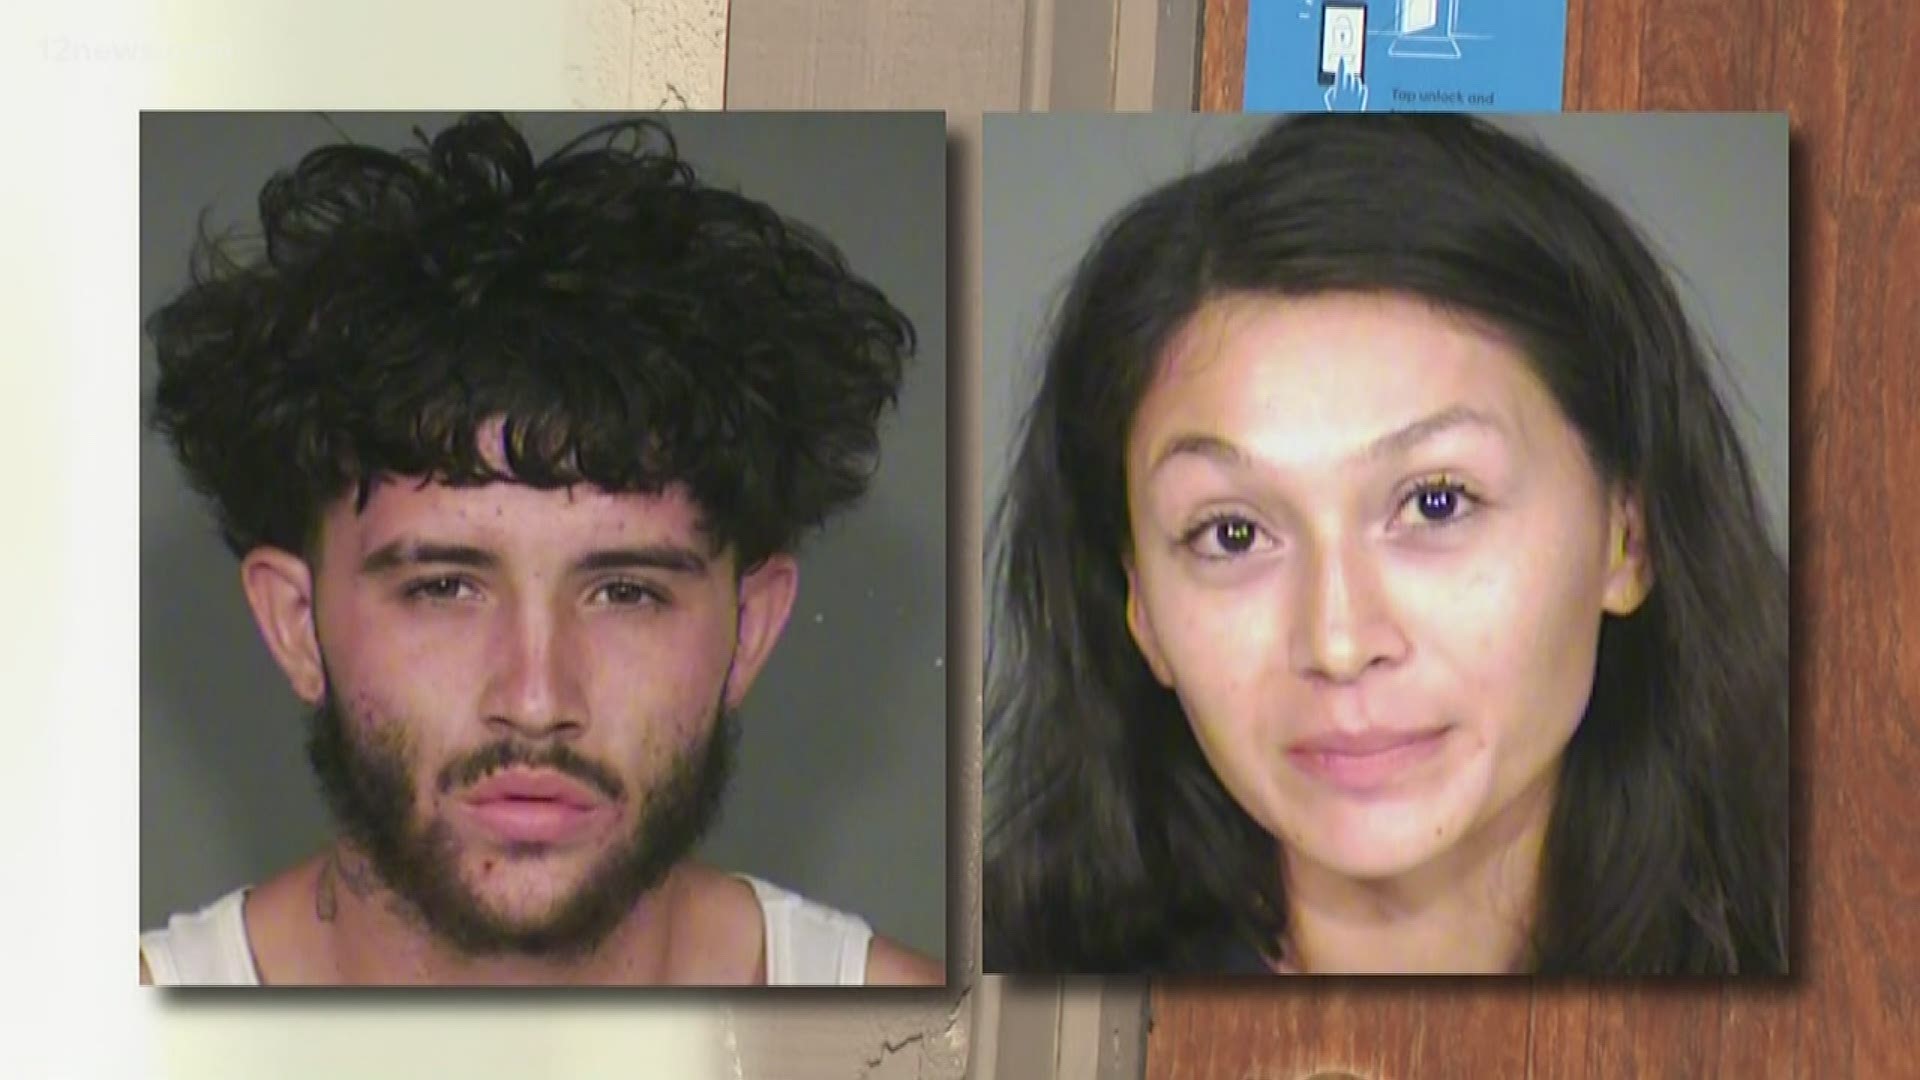 29-year-old Gary Linn and 26-year-old Adriana Gamboa and their kids were found squatting in a home in Chandler by someone interested in looking at that home. It's unclear if the couple disabled the security system of the home themselves. The couple's kids have been placed in CPS custody.